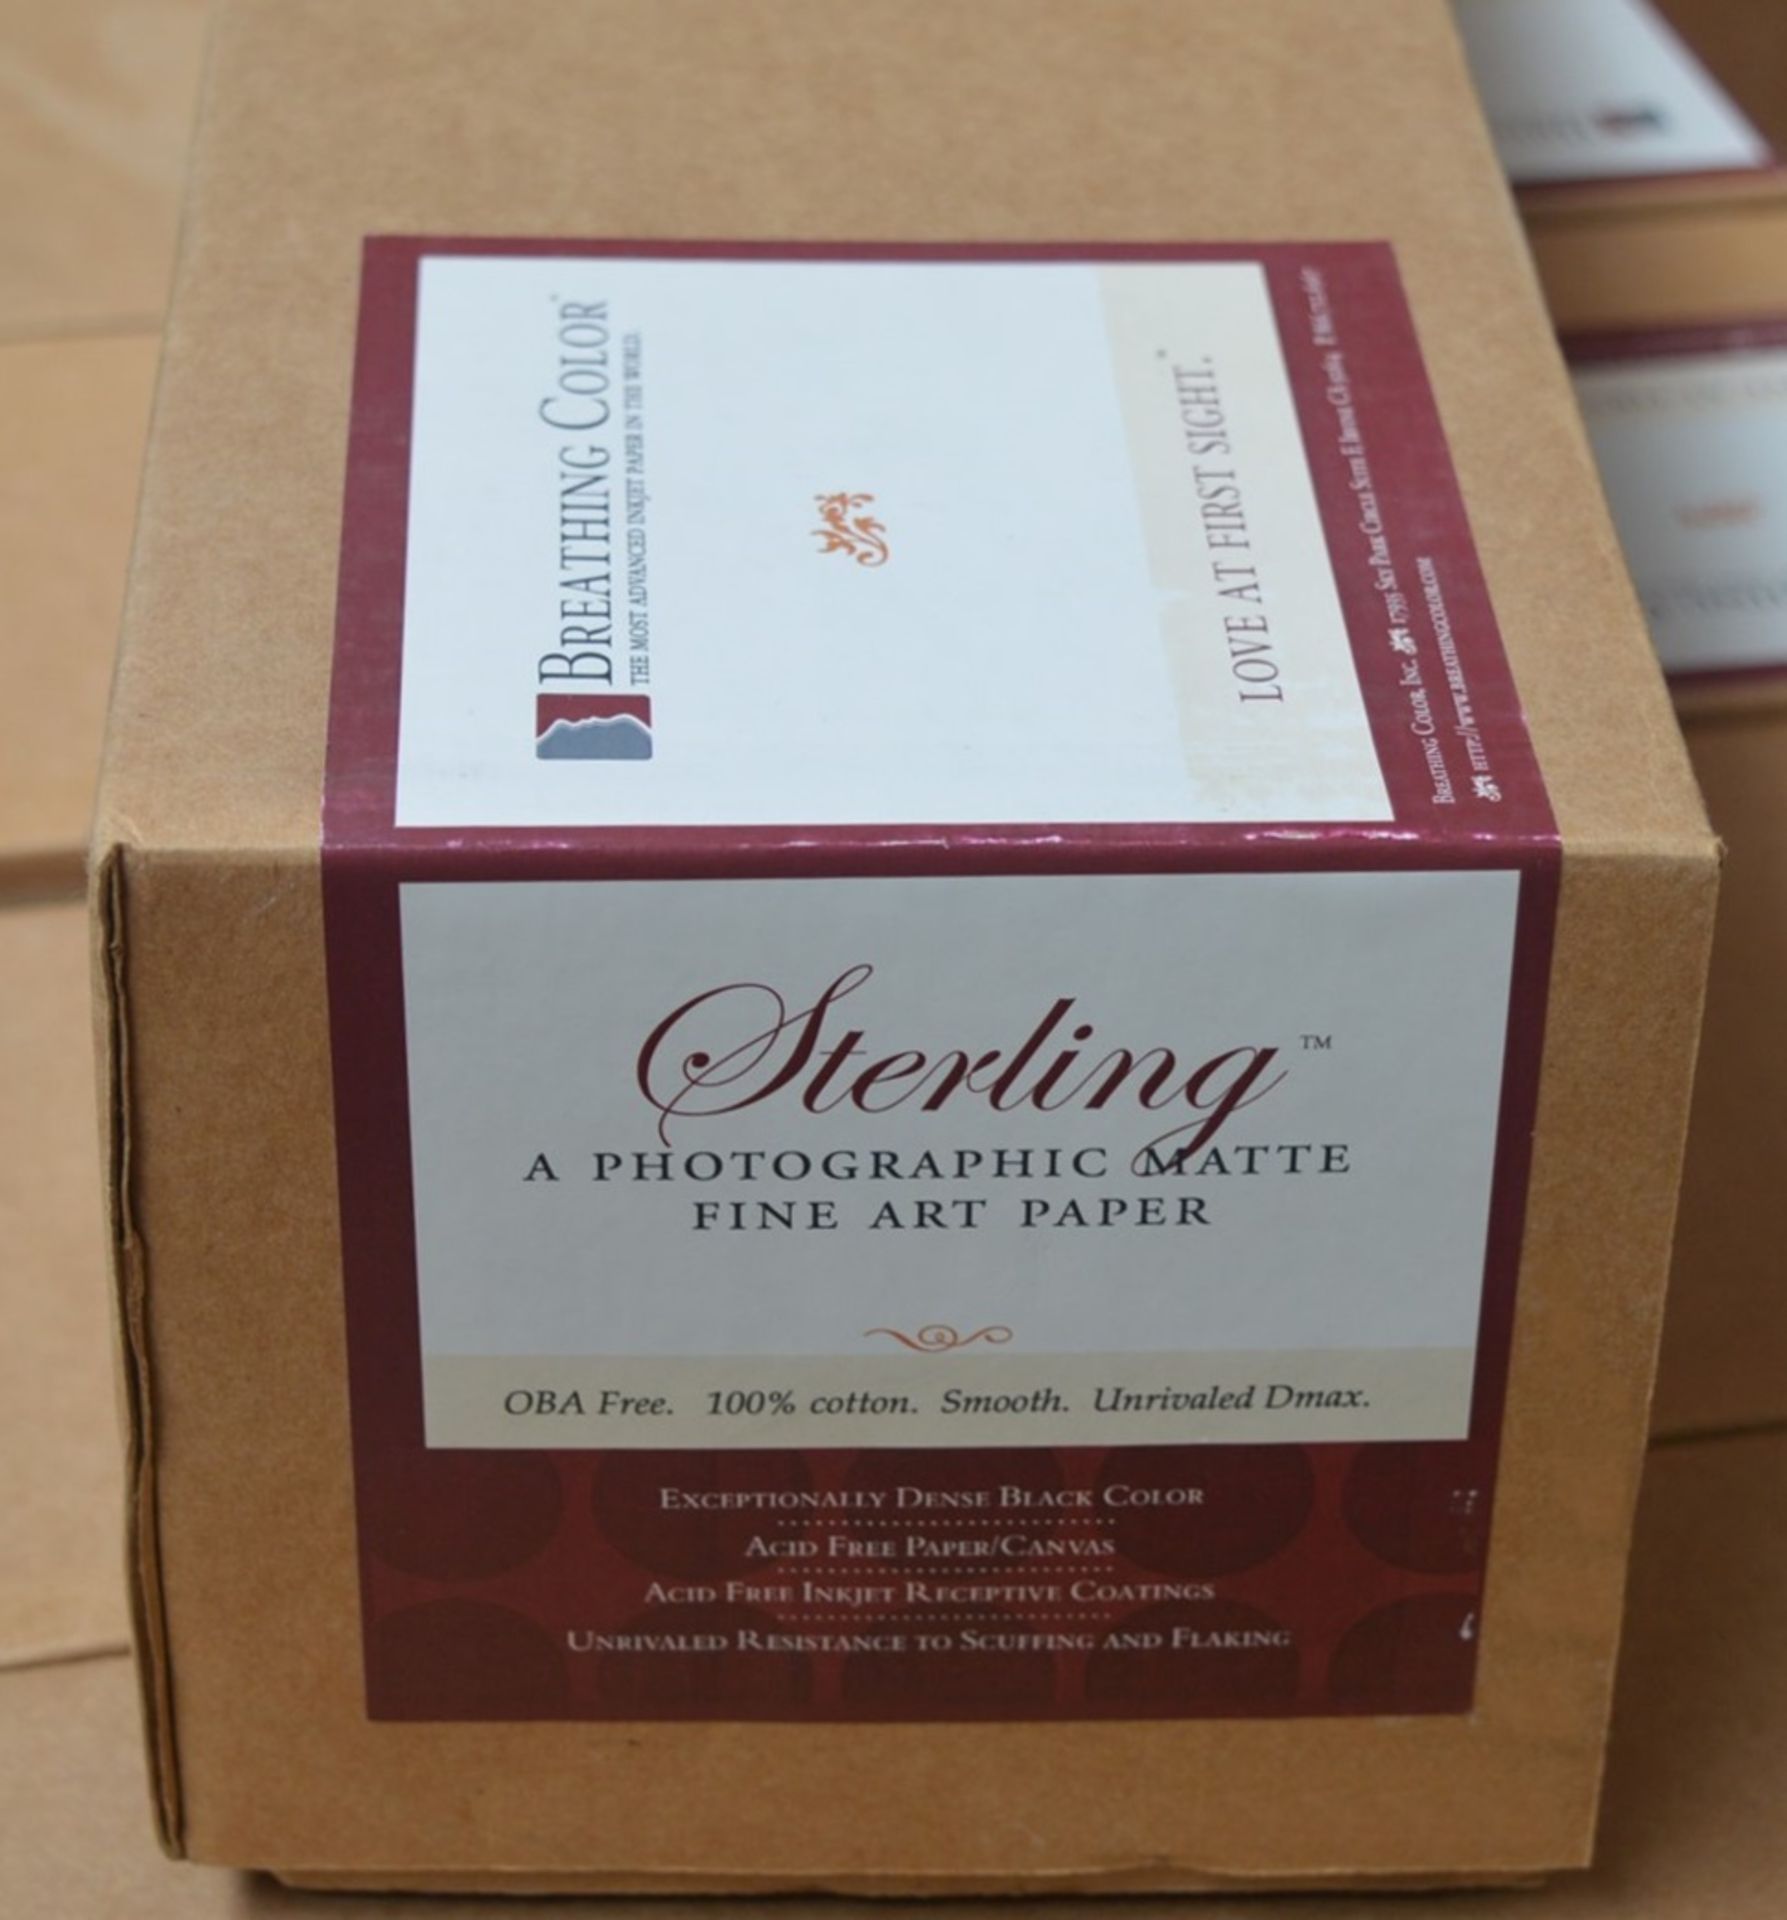 1 x Roll of Breathing Colour STERLING Photographic Matte Fine Art Paper - Size 24" x 50' - - Image 5 of 5